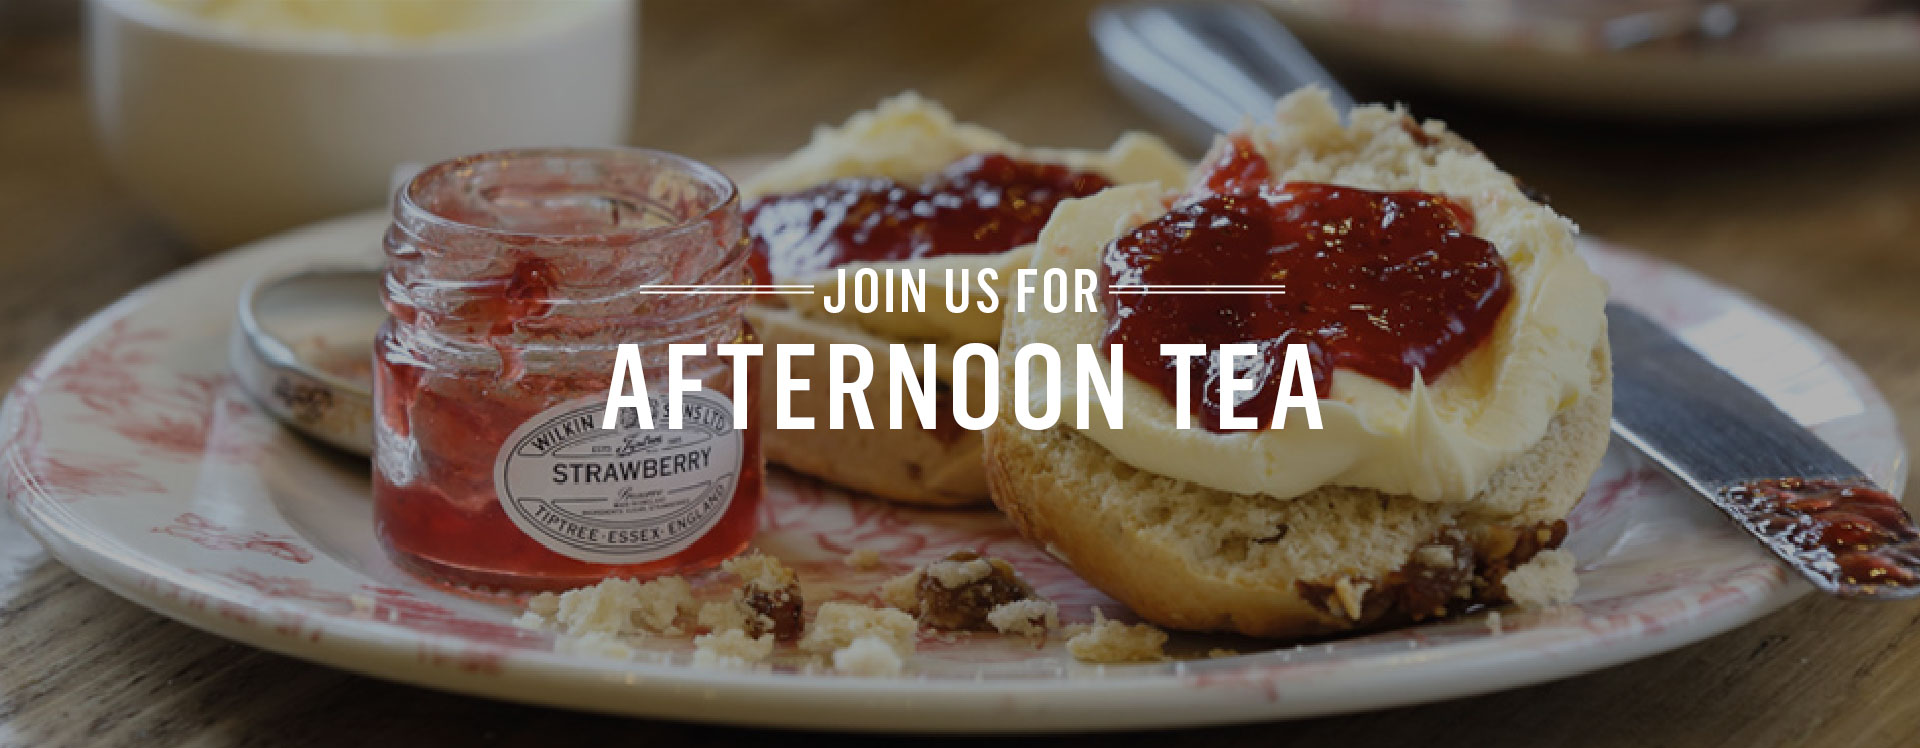 Afternoon tea at Williamson's Tavern - Book a table